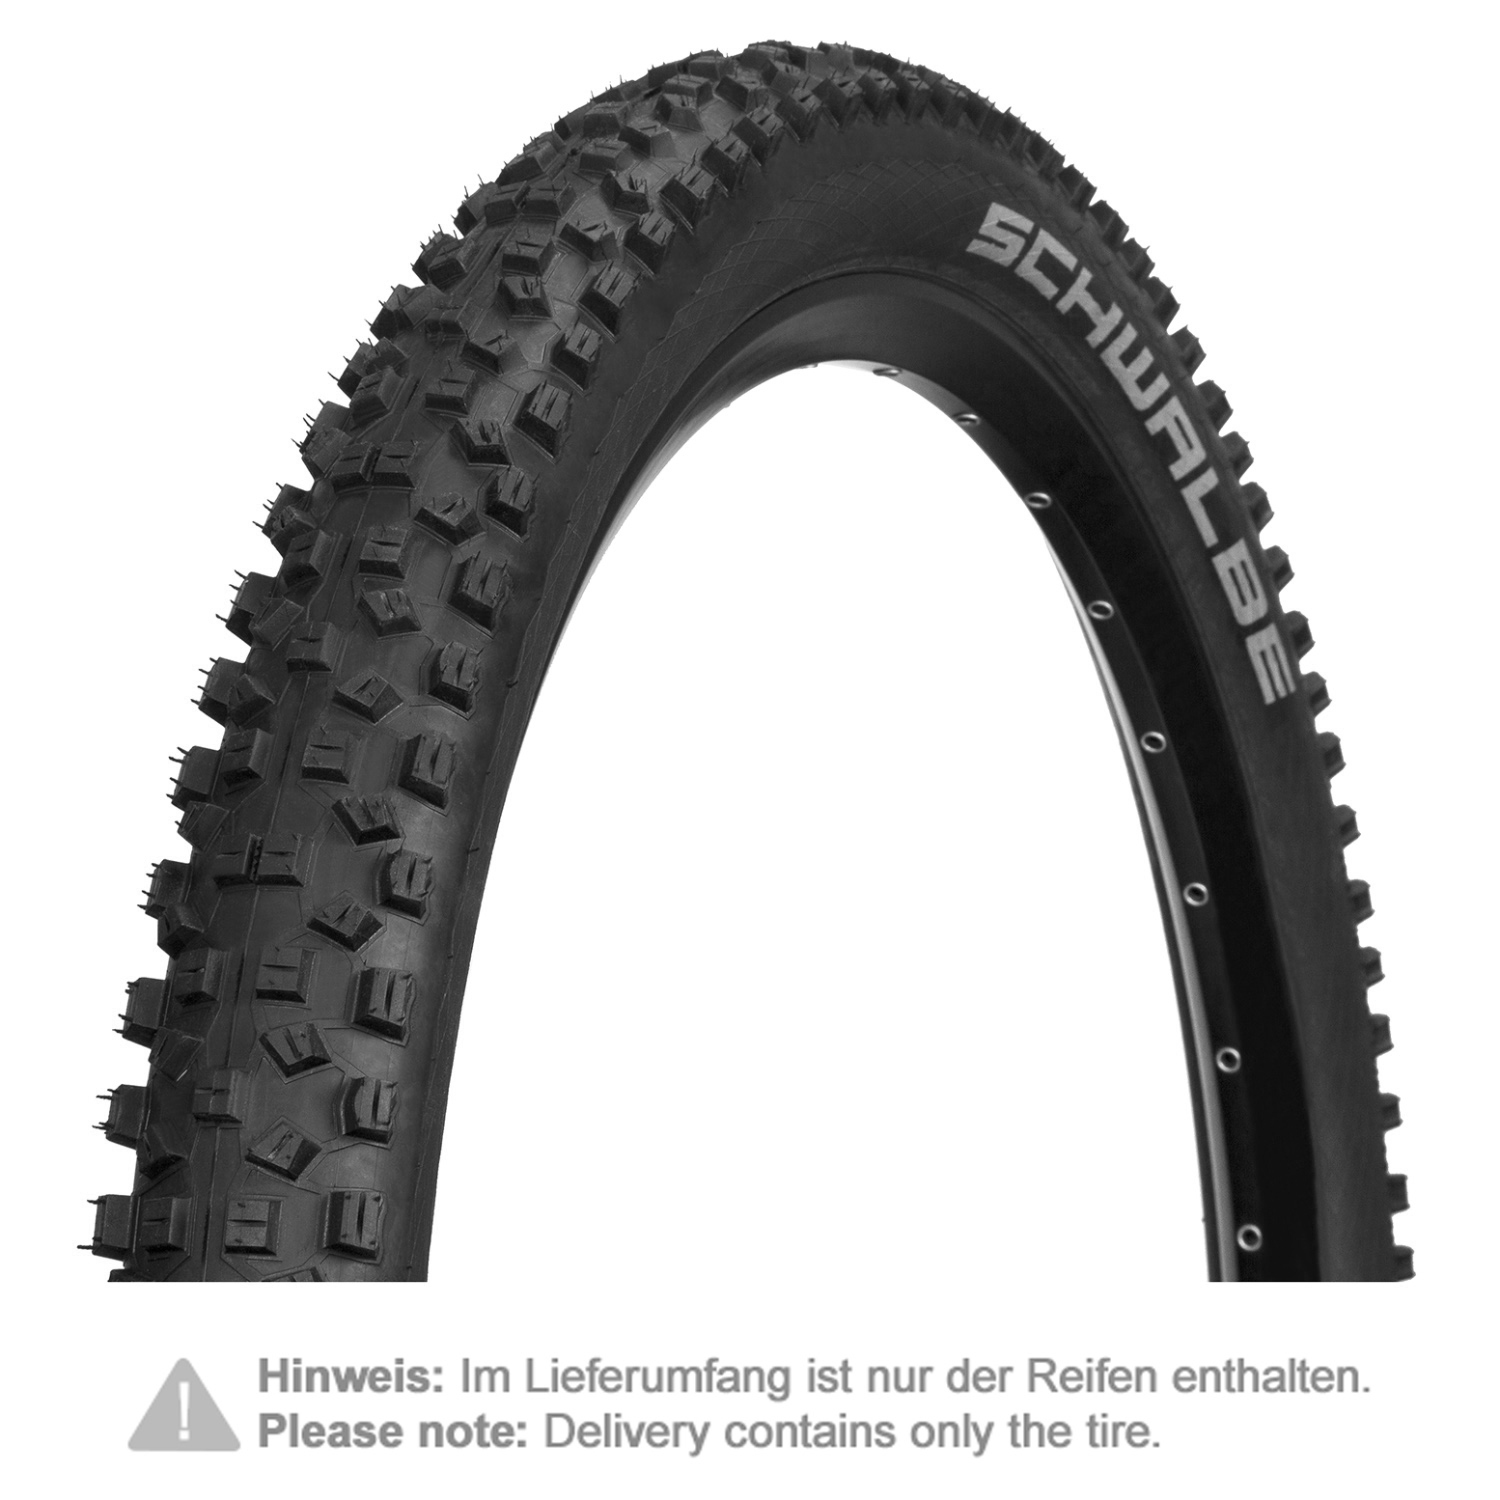 Schwalbe MTB Tire Hans Dampf HS 426 Black, 26 x 2.35 Inches, Evo, SnakeSkin, Tubeless Easy, PaceStar, Foldable